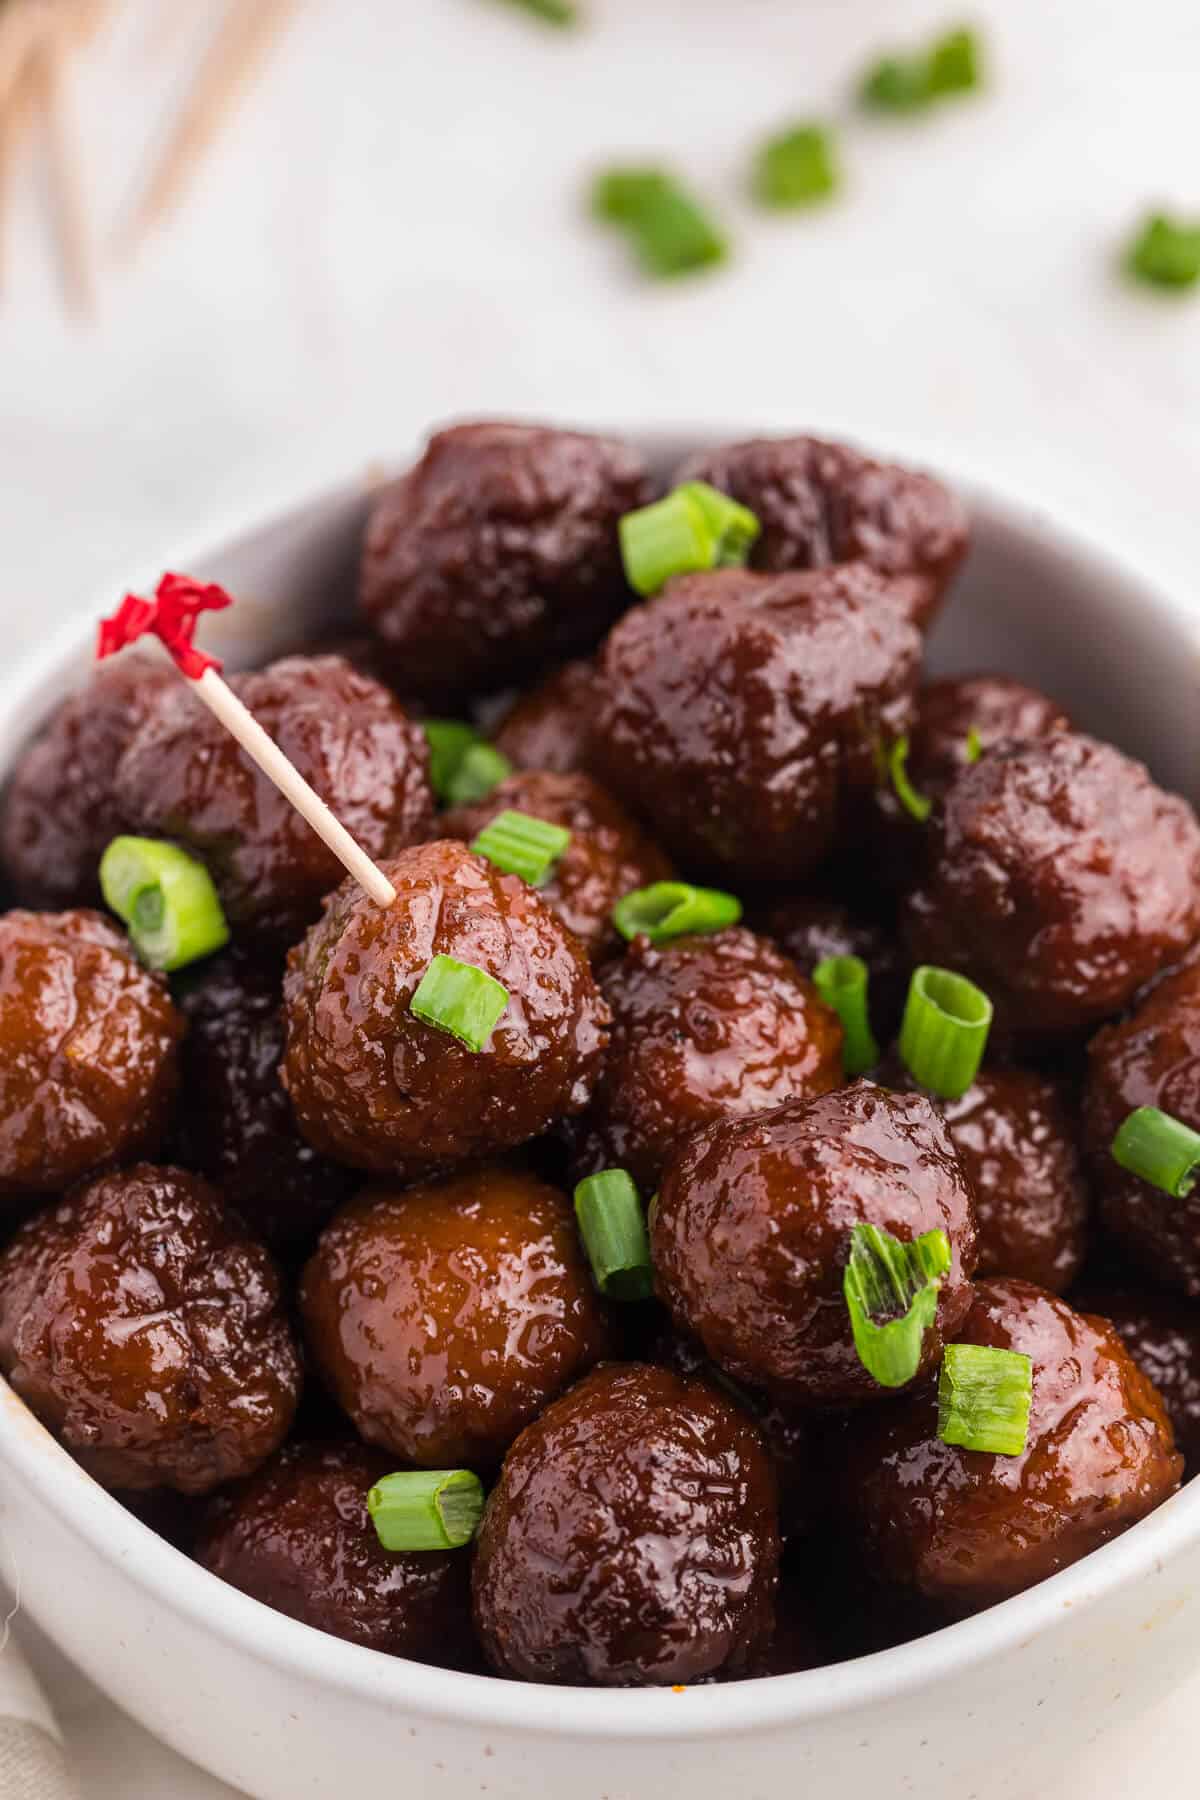 Grape jelly meatballs in a bowl with a toothpick in one meatball.